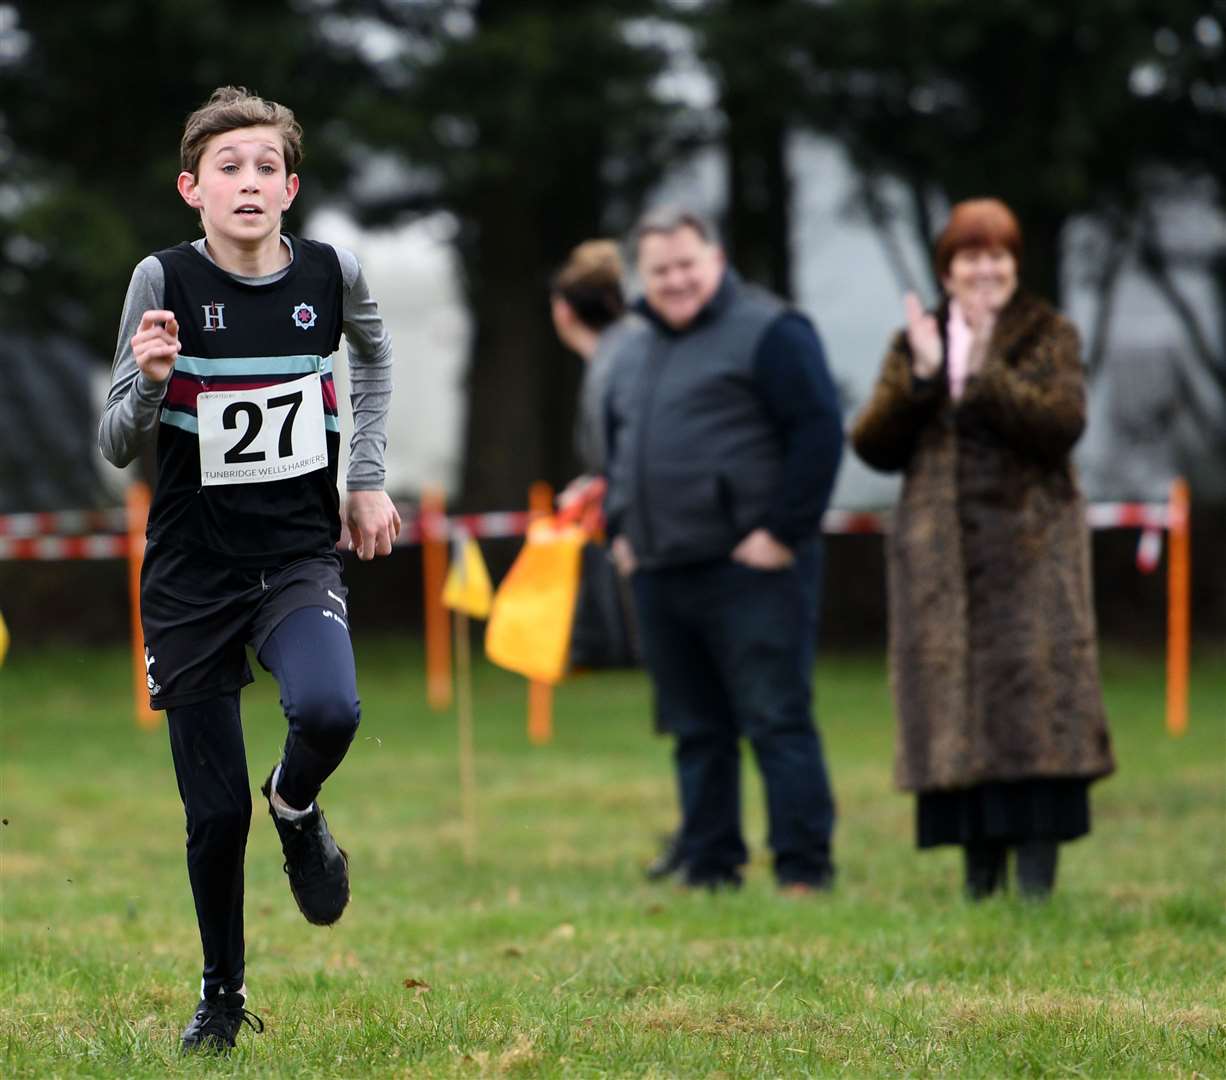 James Shaw of Bromley was third in the Year 7 boys' race. Picture: Barry Goodwin (54437760)